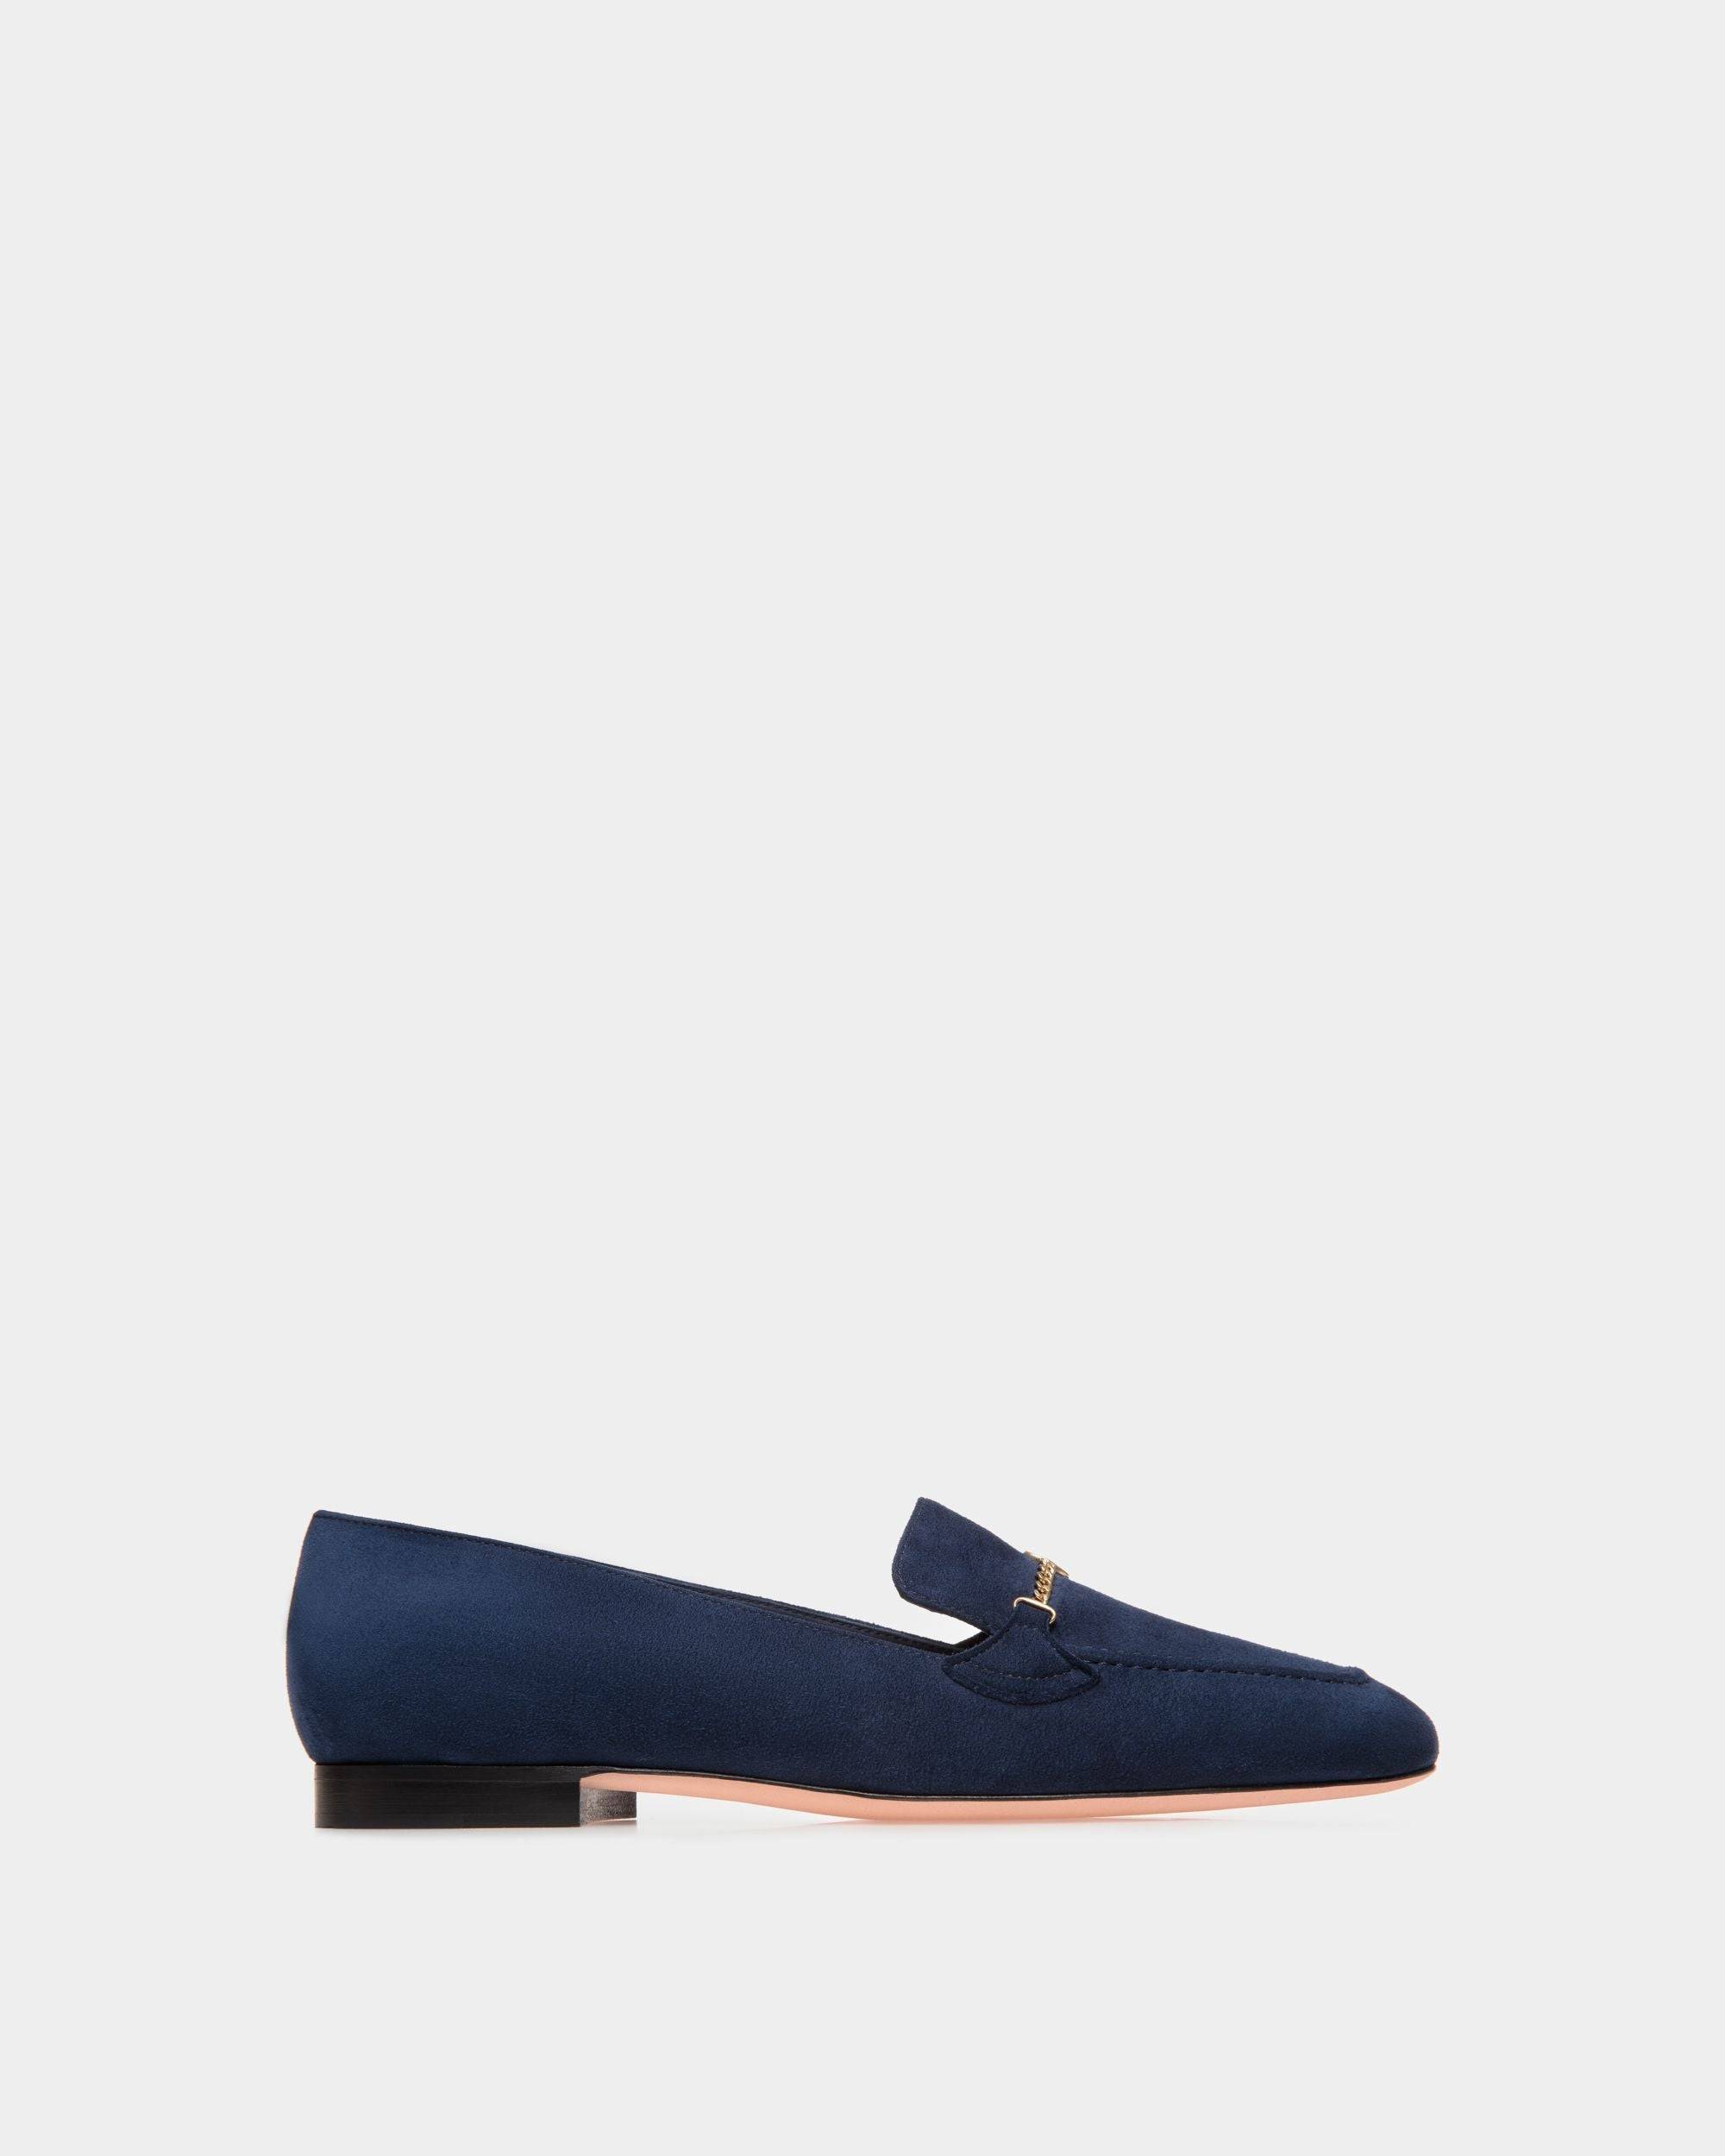 Daily Emblem | Women's Loafer in Blue Suede | Bally | Still Life Side